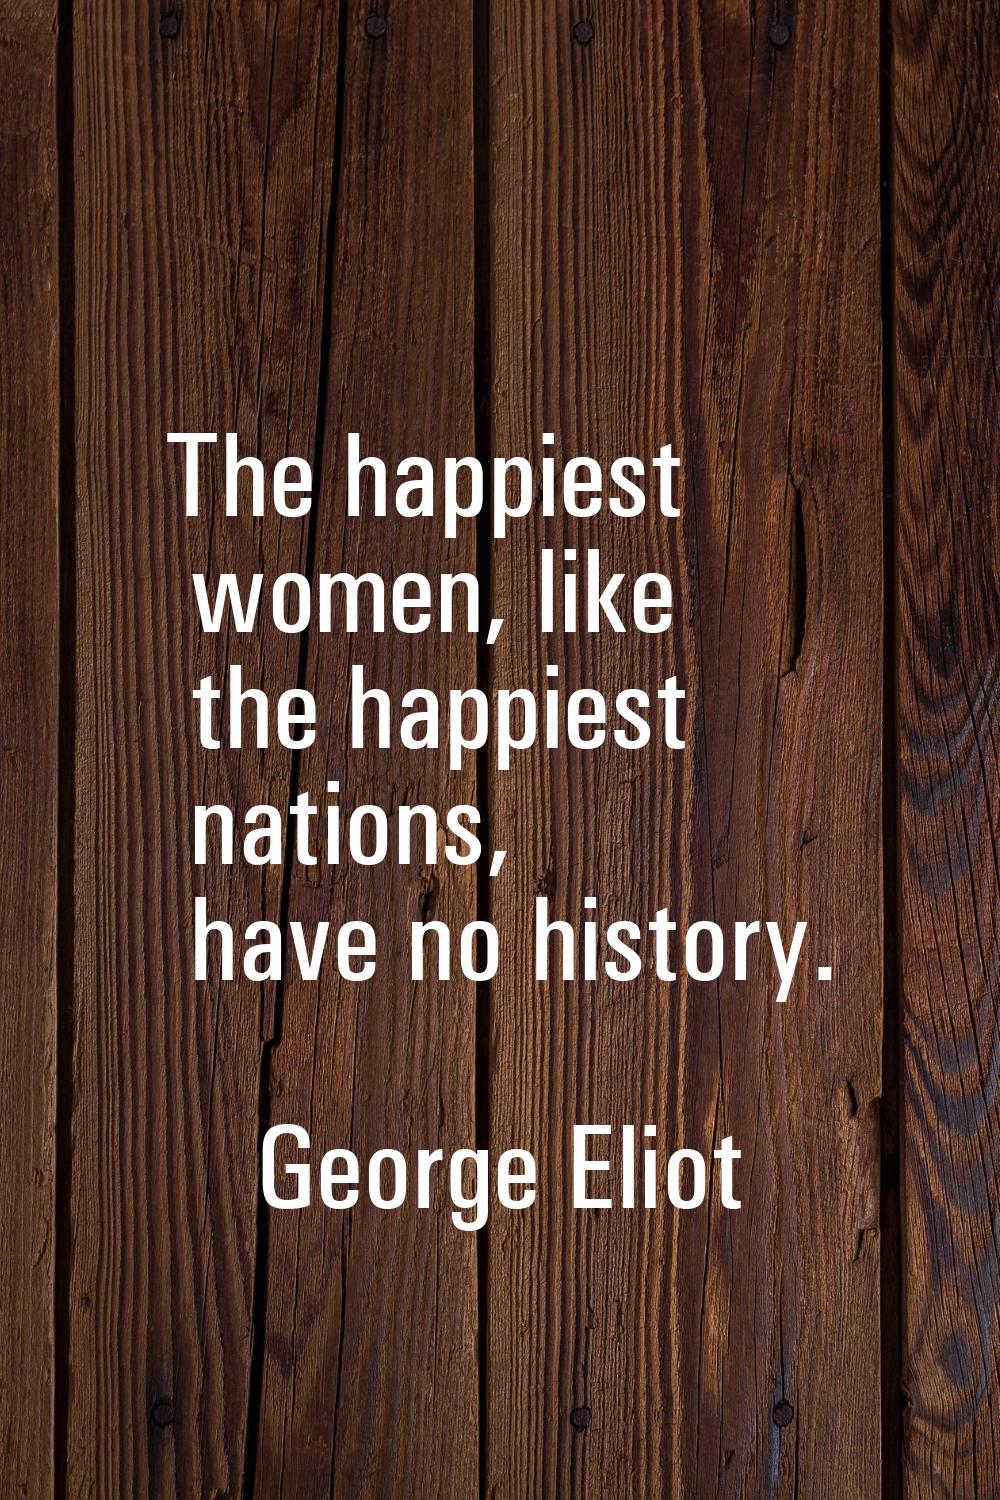 The happiest women, like the happiest nations, have no history.